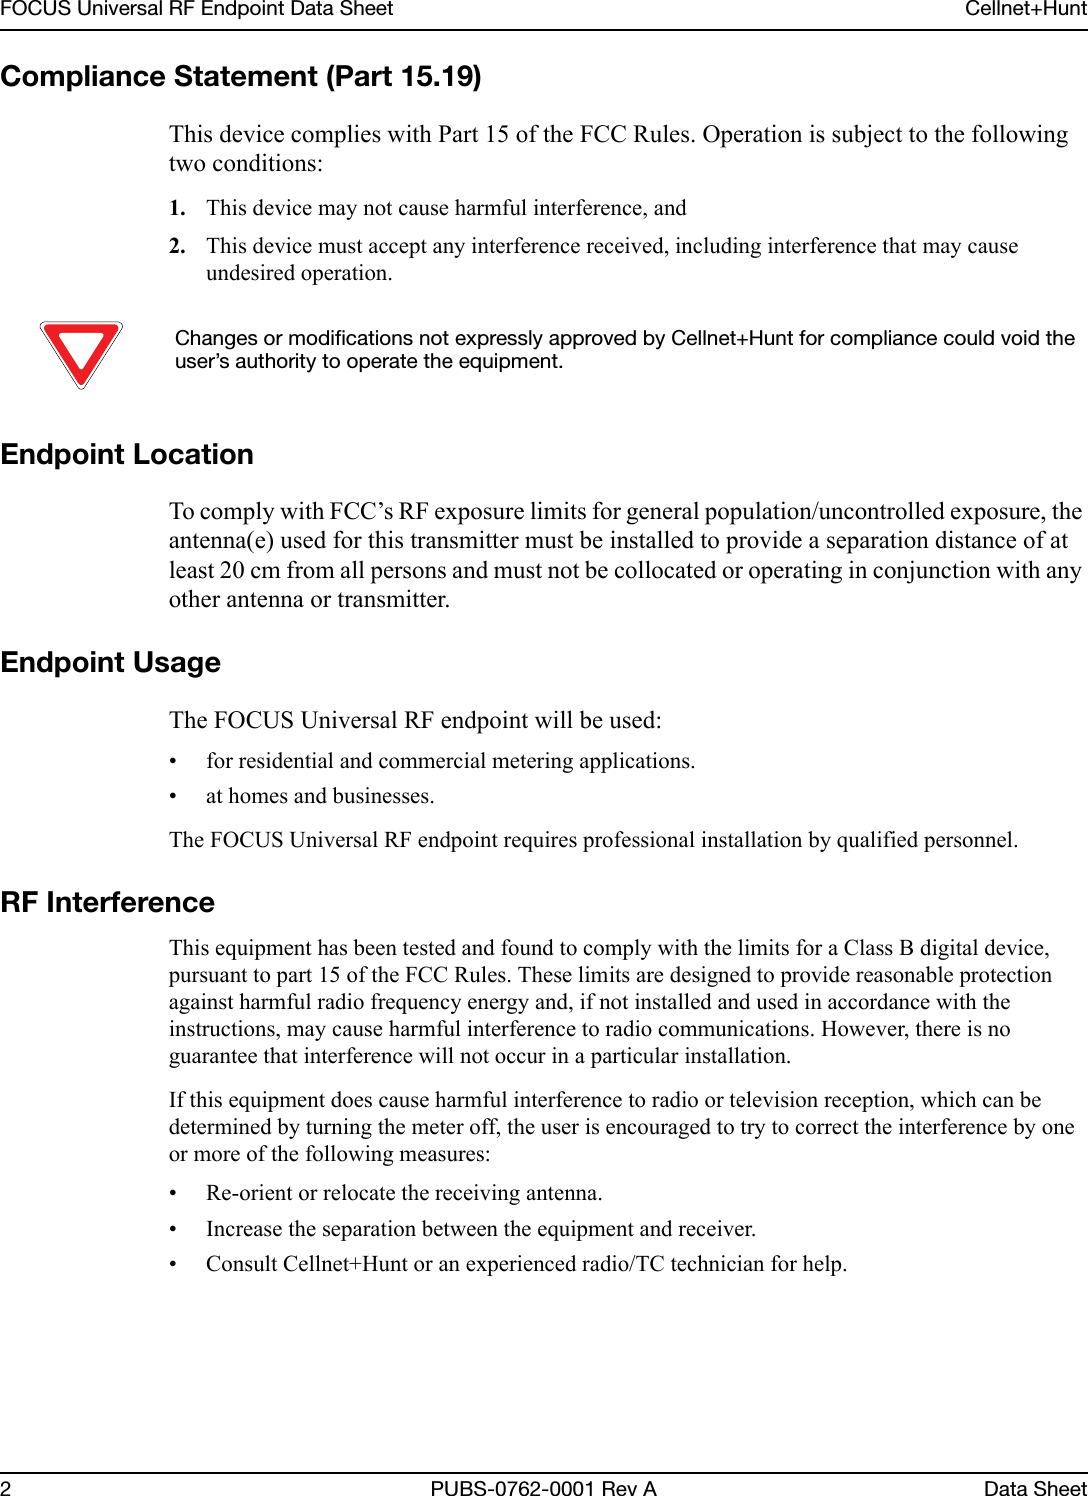 FOCUS Universal RF Endpoint Data Sheet Cellnet+Hunt2 PUBS-0762-0001 Rev A Data SheetCompliance Statement (Part 15.19) This device complies with Part 15 of the FCC Rules. Operation is subject to the following two conditions:1. This device may not cause harmful interference, and2. This device must accept any interference received, including interference that may cause undesired operation.Endpoint LocationTo comply with FCC’s RF exposure limits for general population/uncontrolled exposure, the antenna(e) used for this transmitter must be installed to provide a separation distance of at least 20 cm from all persons and must not be collocated or operating in conjunction with any other antenna or transmitter.Endpoint UsageThe FOCUS Universal RF endpoint will be used:• for residential and commercial metering applications.• at homes and businesses.The FOCUS Universal RF endpoint requires professional installation by qualified personnel.RF InterferenceThis equipment has been tested and found to comply with the limits for a Class B digital device, pursuant to part 15 of the FCC Rules. These limits are designed to provide reasonable protection against harmful radio frequency energy and, if not installed and used in accordance with the instructions, may cause harmful interference to radio communications. However, there is no guarantee that interference will not occur in a particular installation. If this equipment does cause harmful interference to radio or television reception, which can be determined by turning the meter off, the user is encouraged to try to correct the interference by one or more of the following measures: • Re-orient or relocate the receiving antenna.• Increase the separation between the equipment and receiver.• Consult Cellnet+Hunt or an experienced radio/TC technician for help.Changes or modifications not expressly approved by Cellnet+Hunt for compliance could void the user’s authority to operate the equipment.